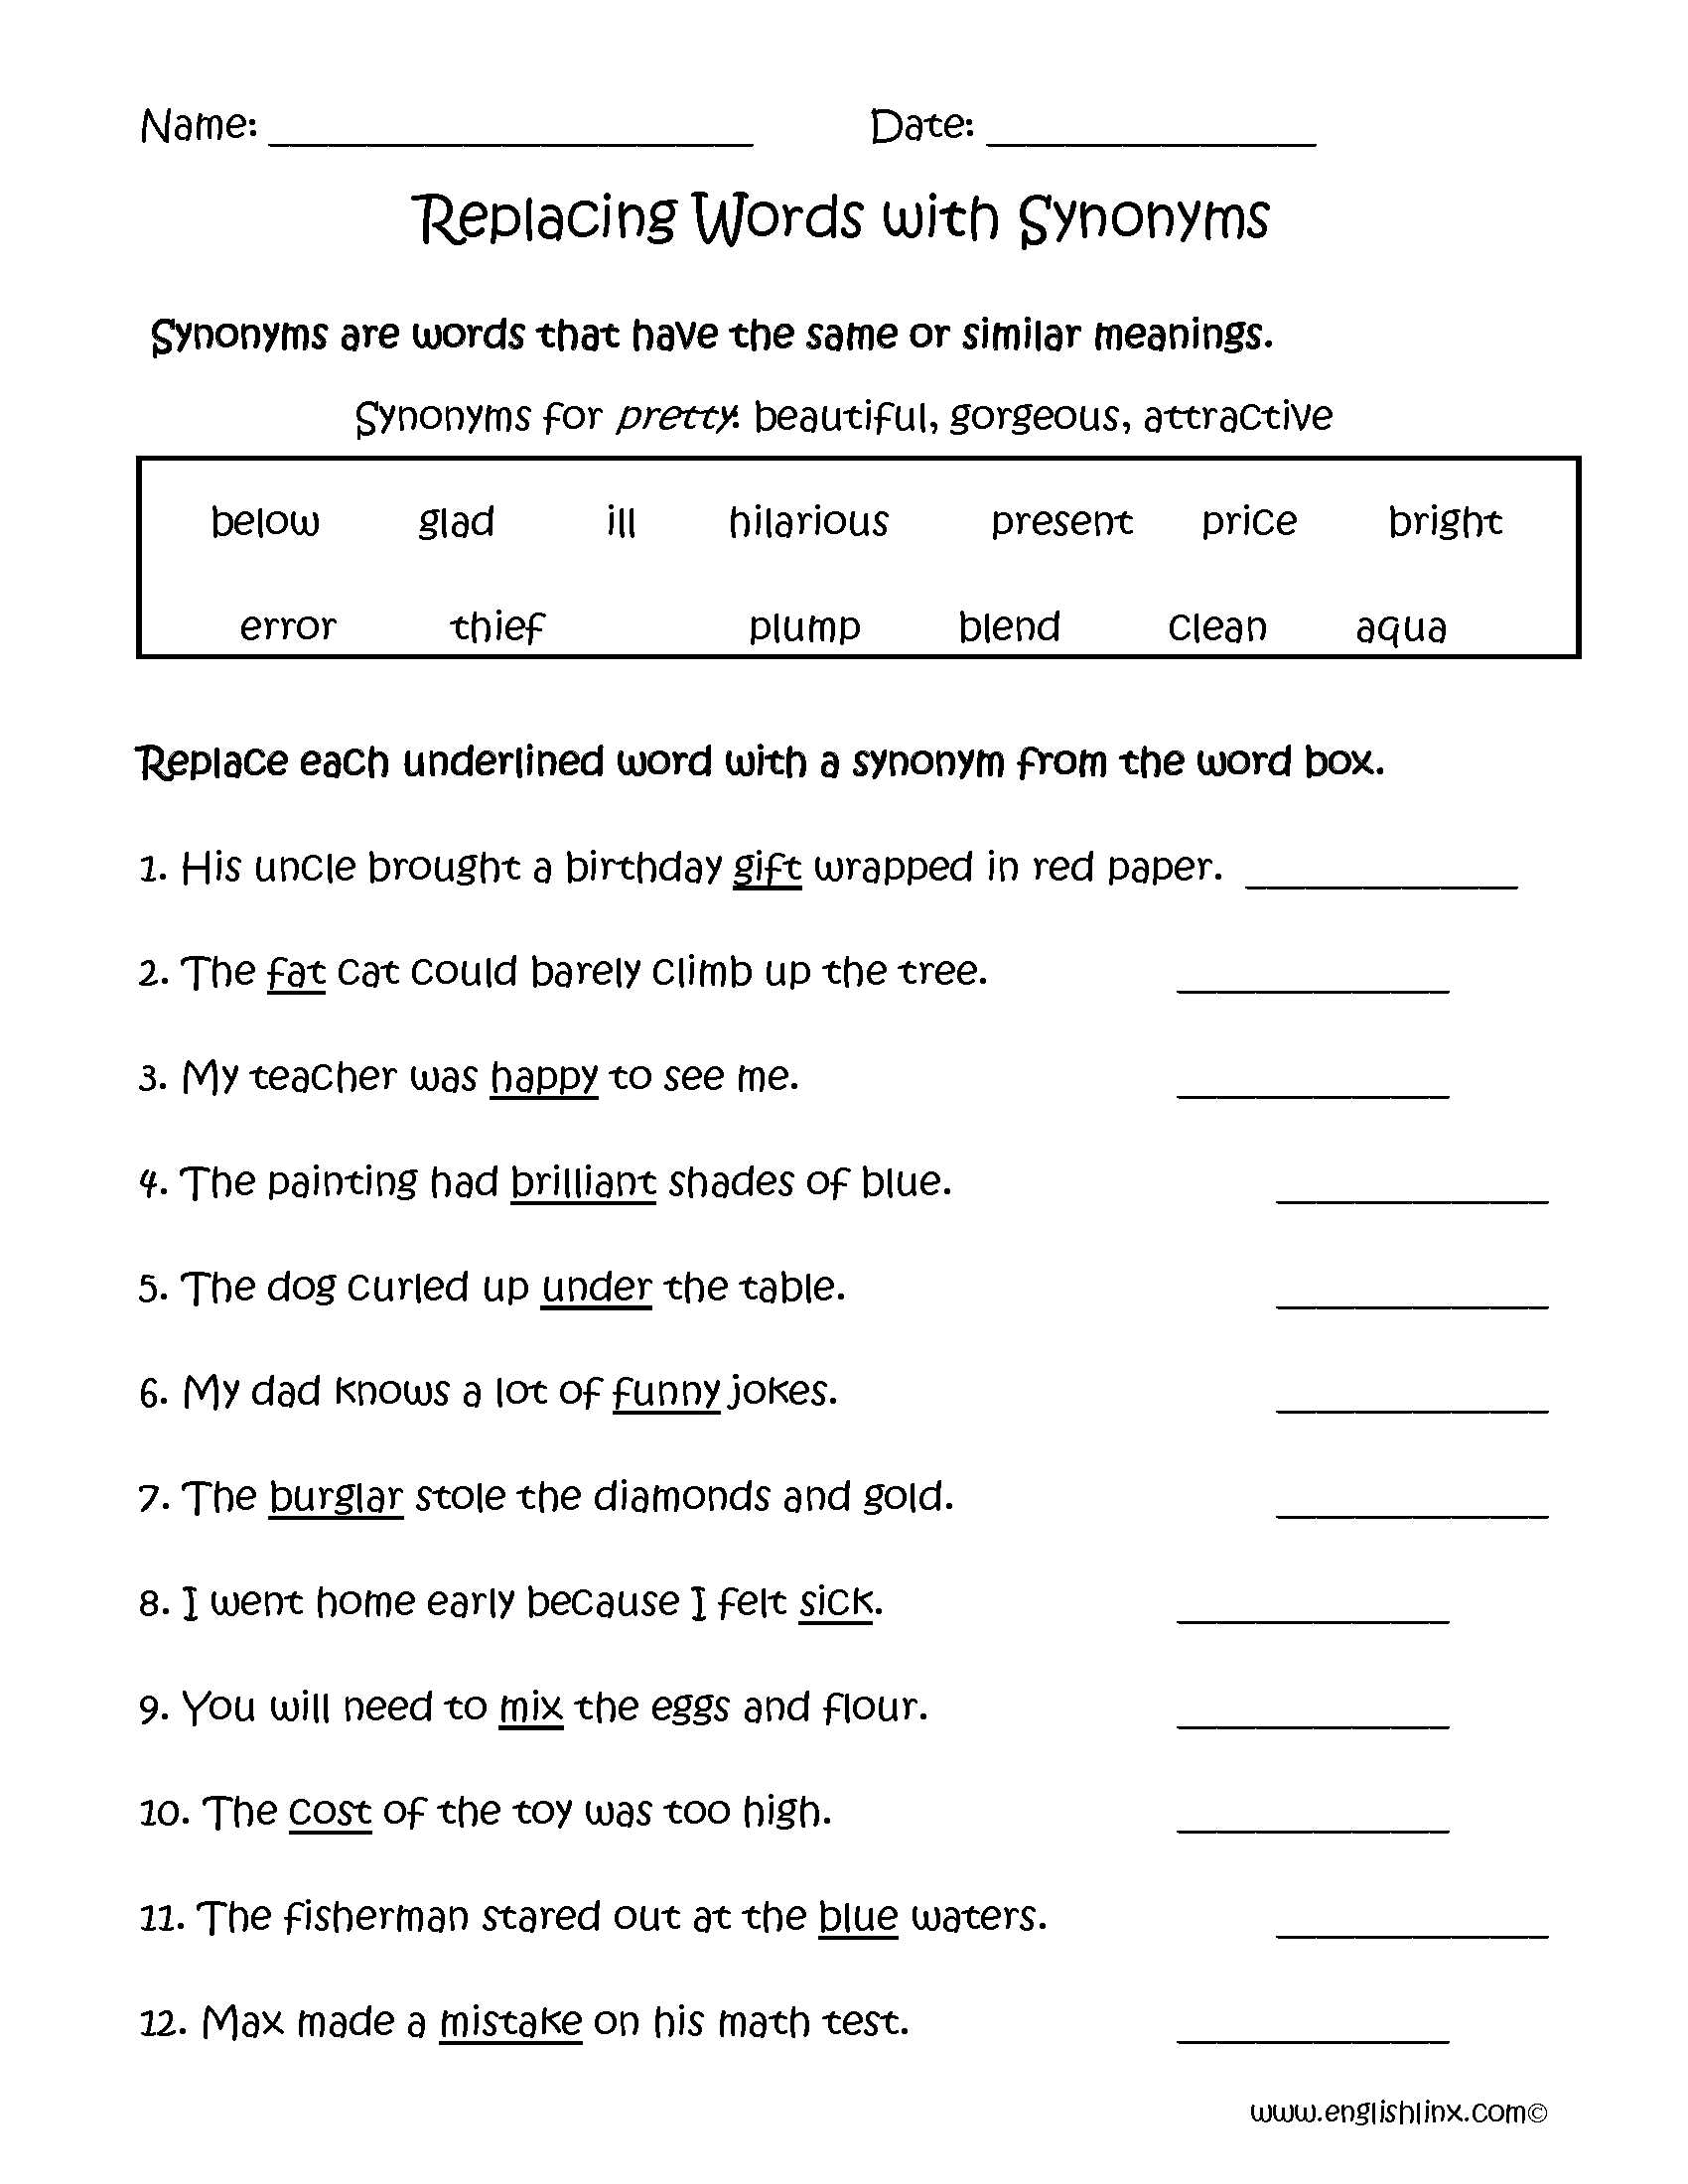 Subject Verb Agreement Practice Worksheets Also Replacing Words with Synonyms Worksheets